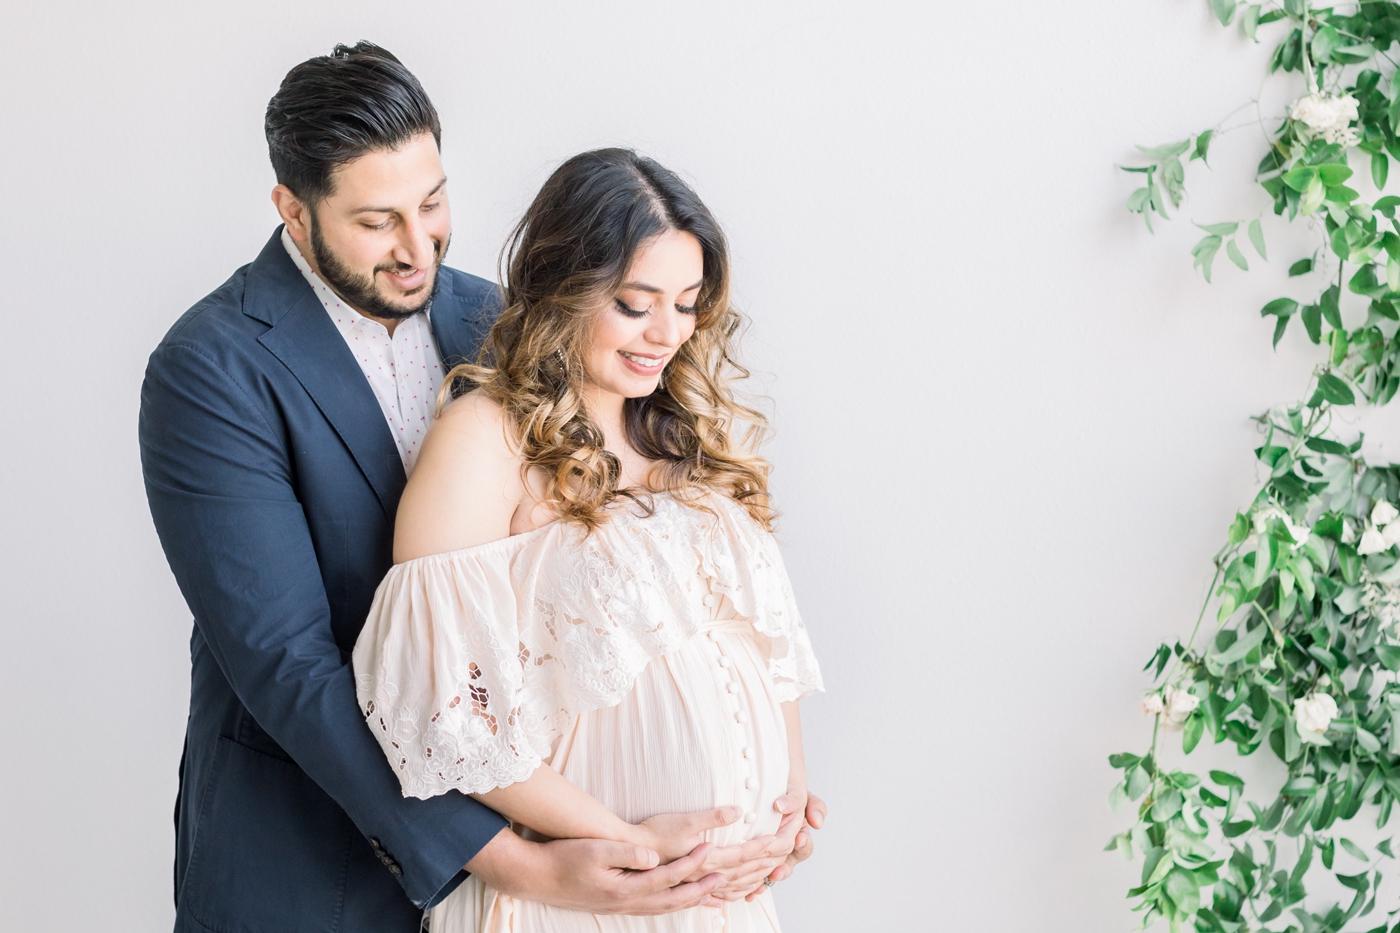 Dad hugging mom during studio maternity session with florals in background. Photo by Sana Ahmed Photography.